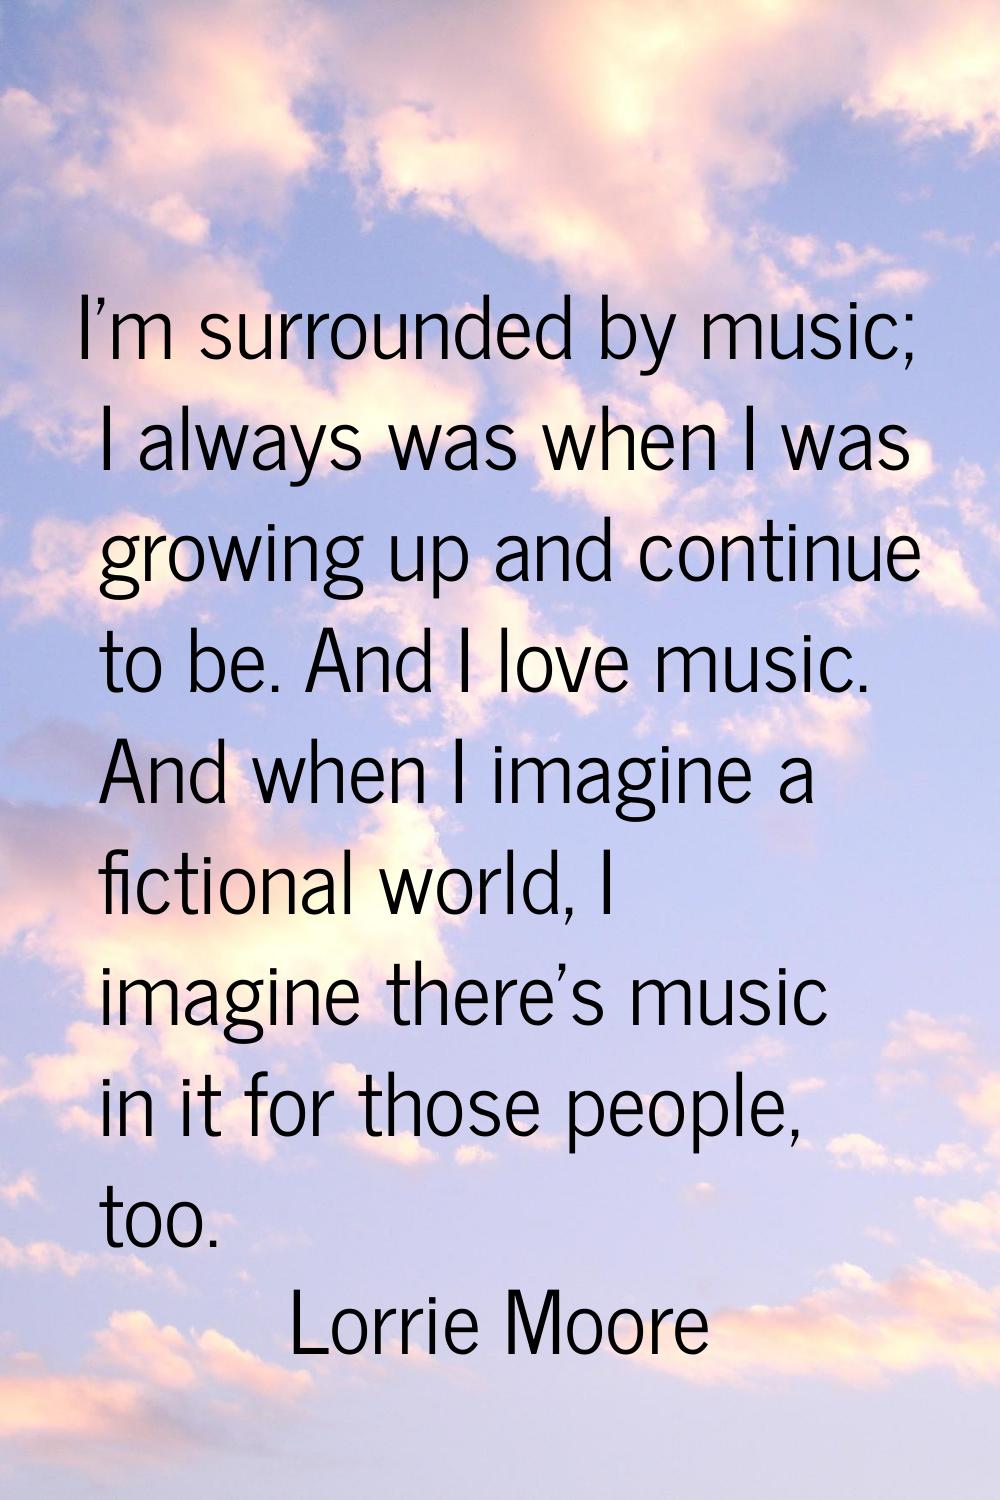 I'm surrounded by music; I always was when I was growing up and continue to be. And I love music. A